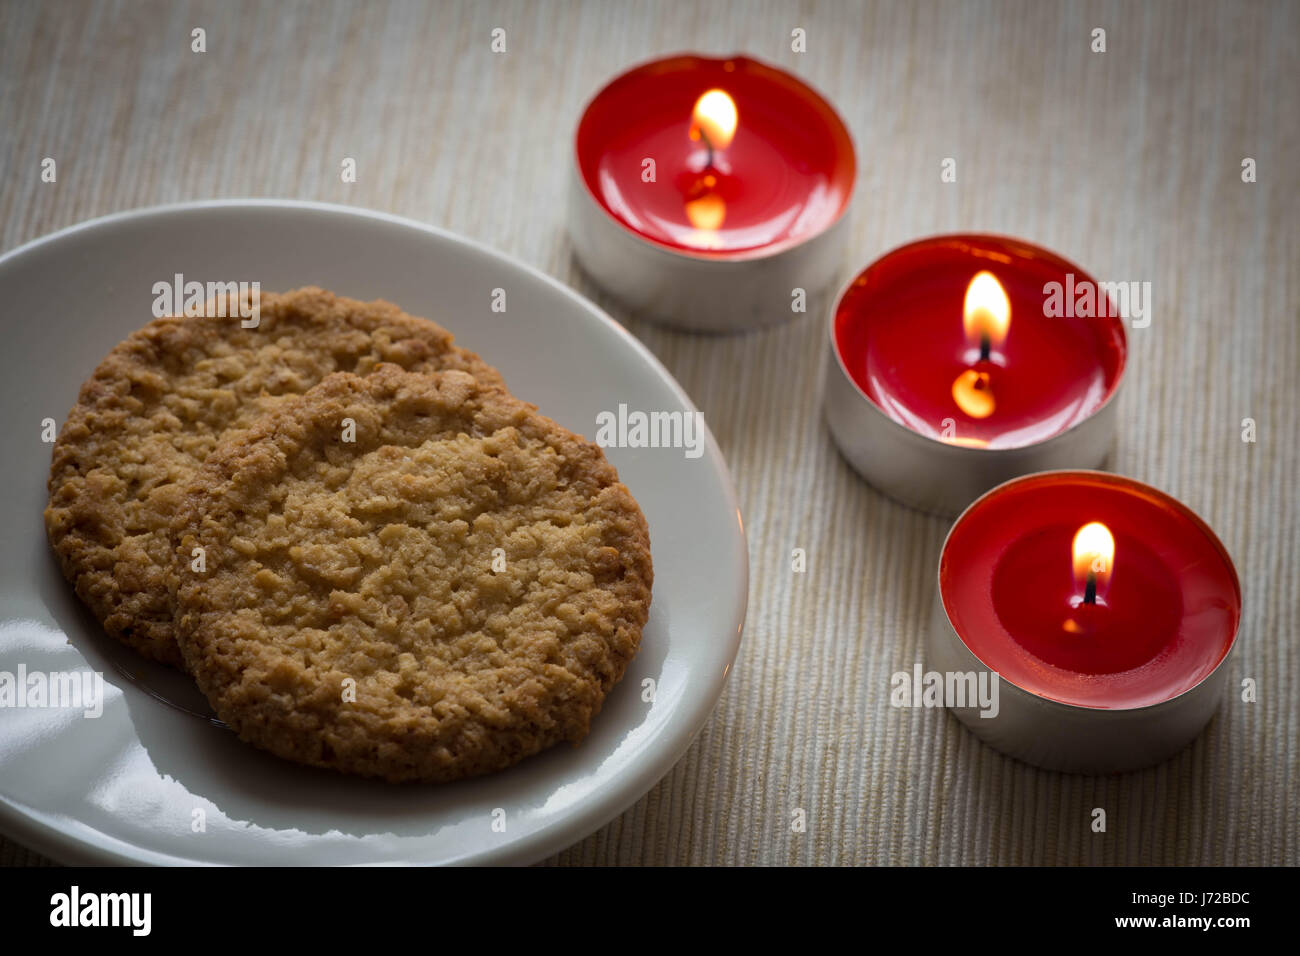 View of the Homemade cookies surrounded by candles, hygge time Stock Photo